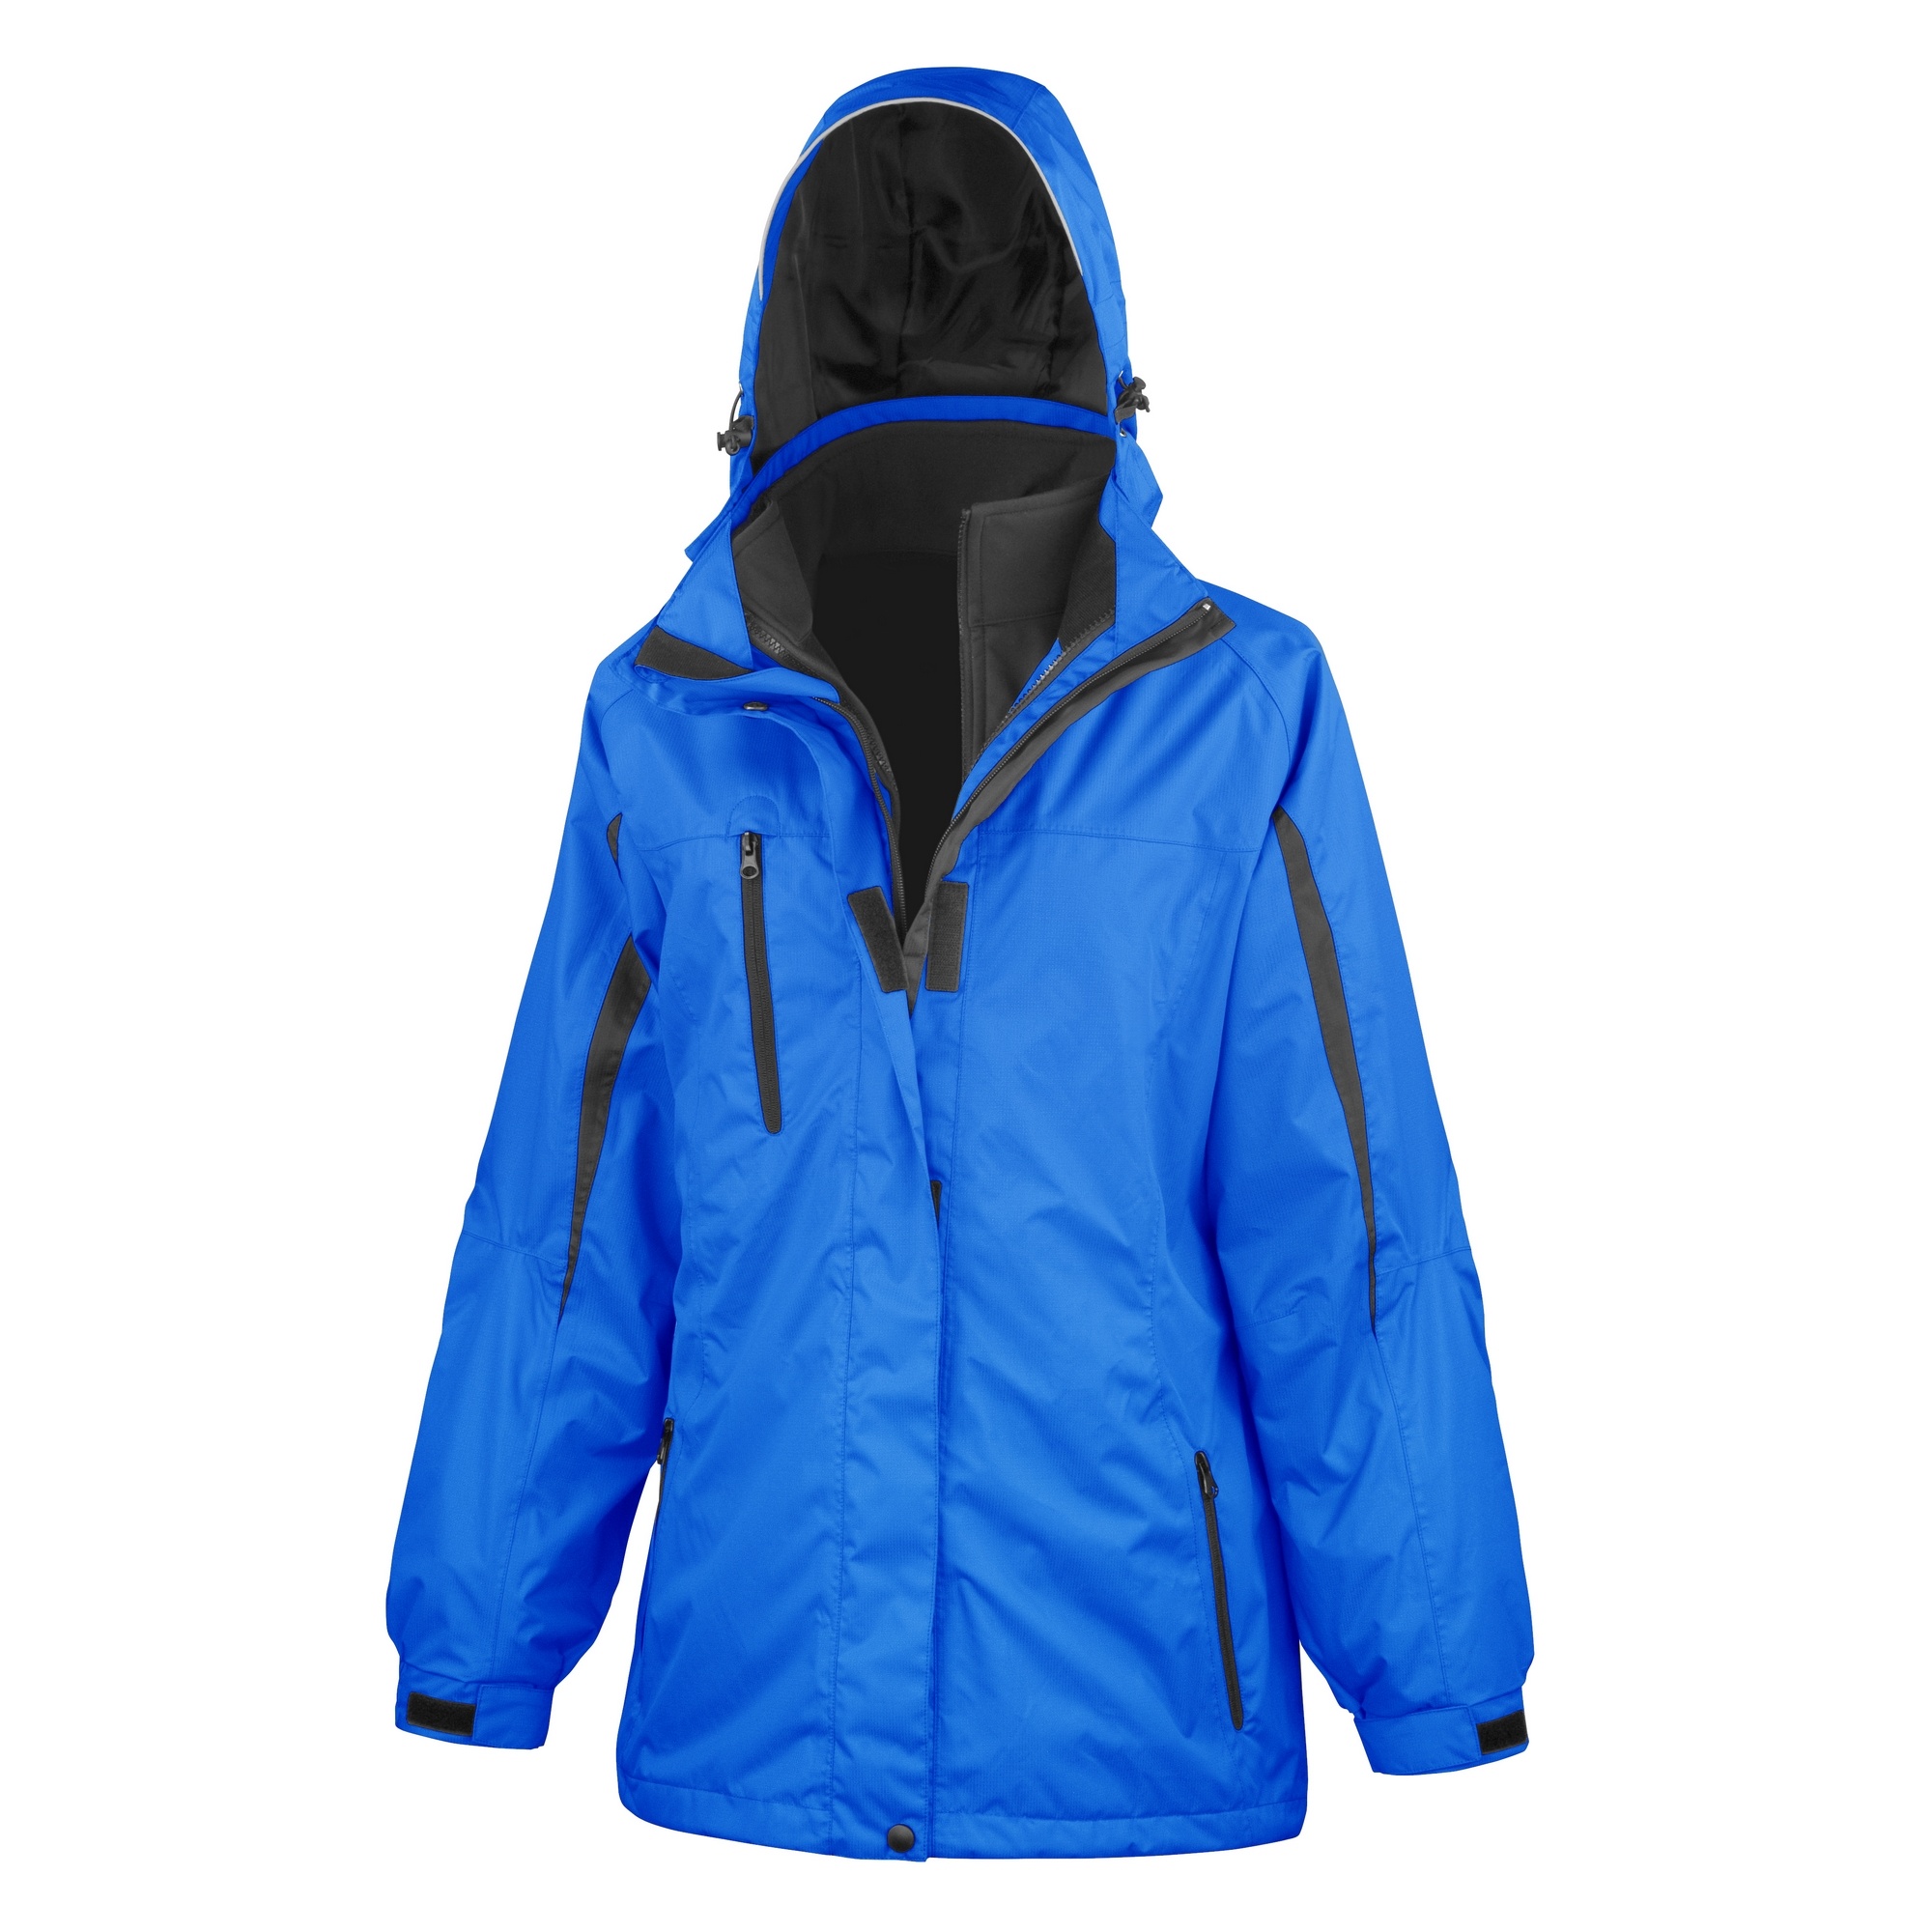 Result Womens 3 In 1 Softshell Journey Jacket With Hood - image 1 of 5